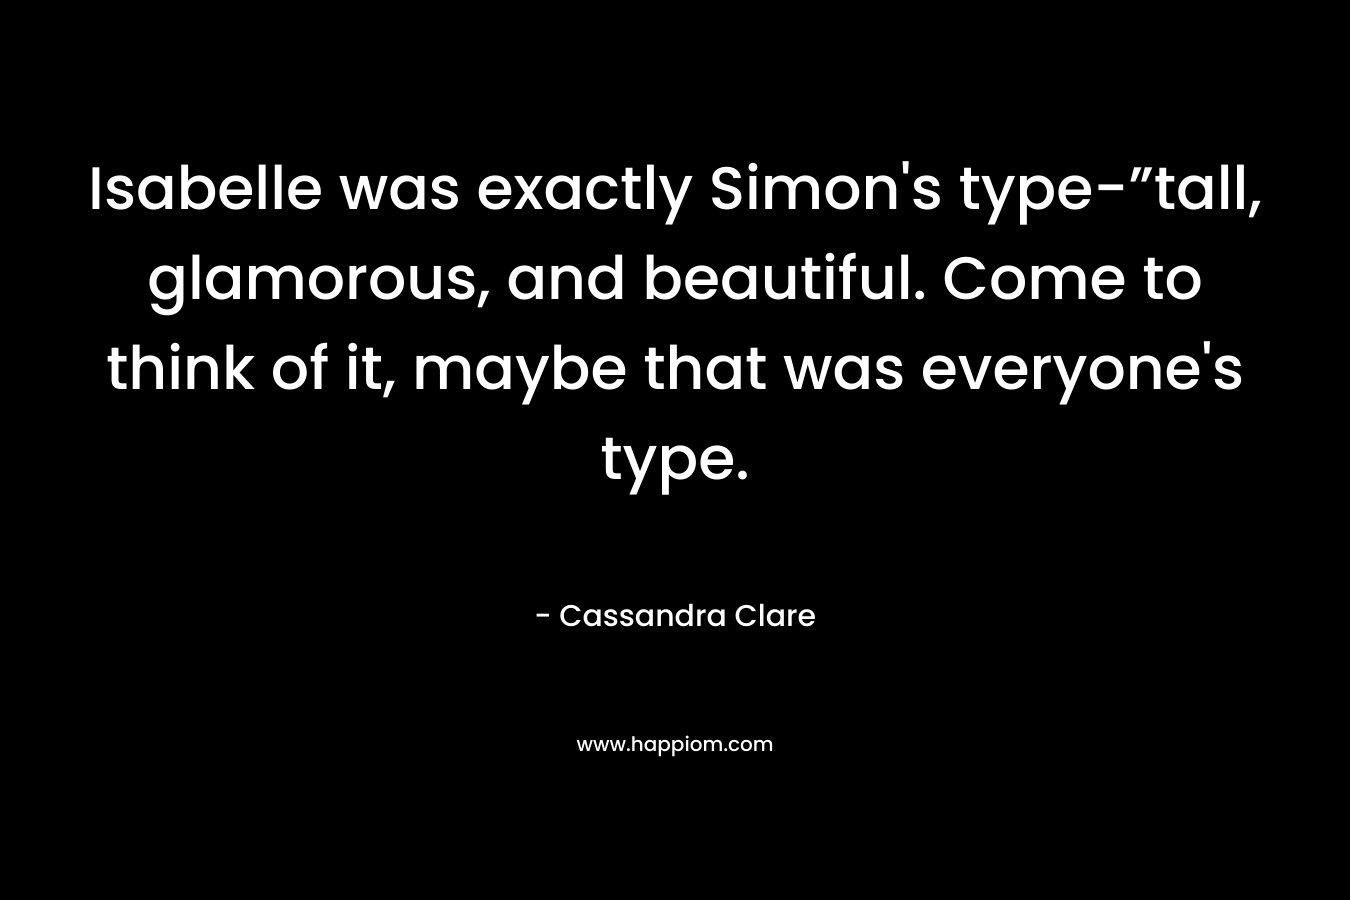 Isabelle was exactly Simon's type-”tall, glamorous, and beautiful. Come to think of it, maybe that was everyone's type.